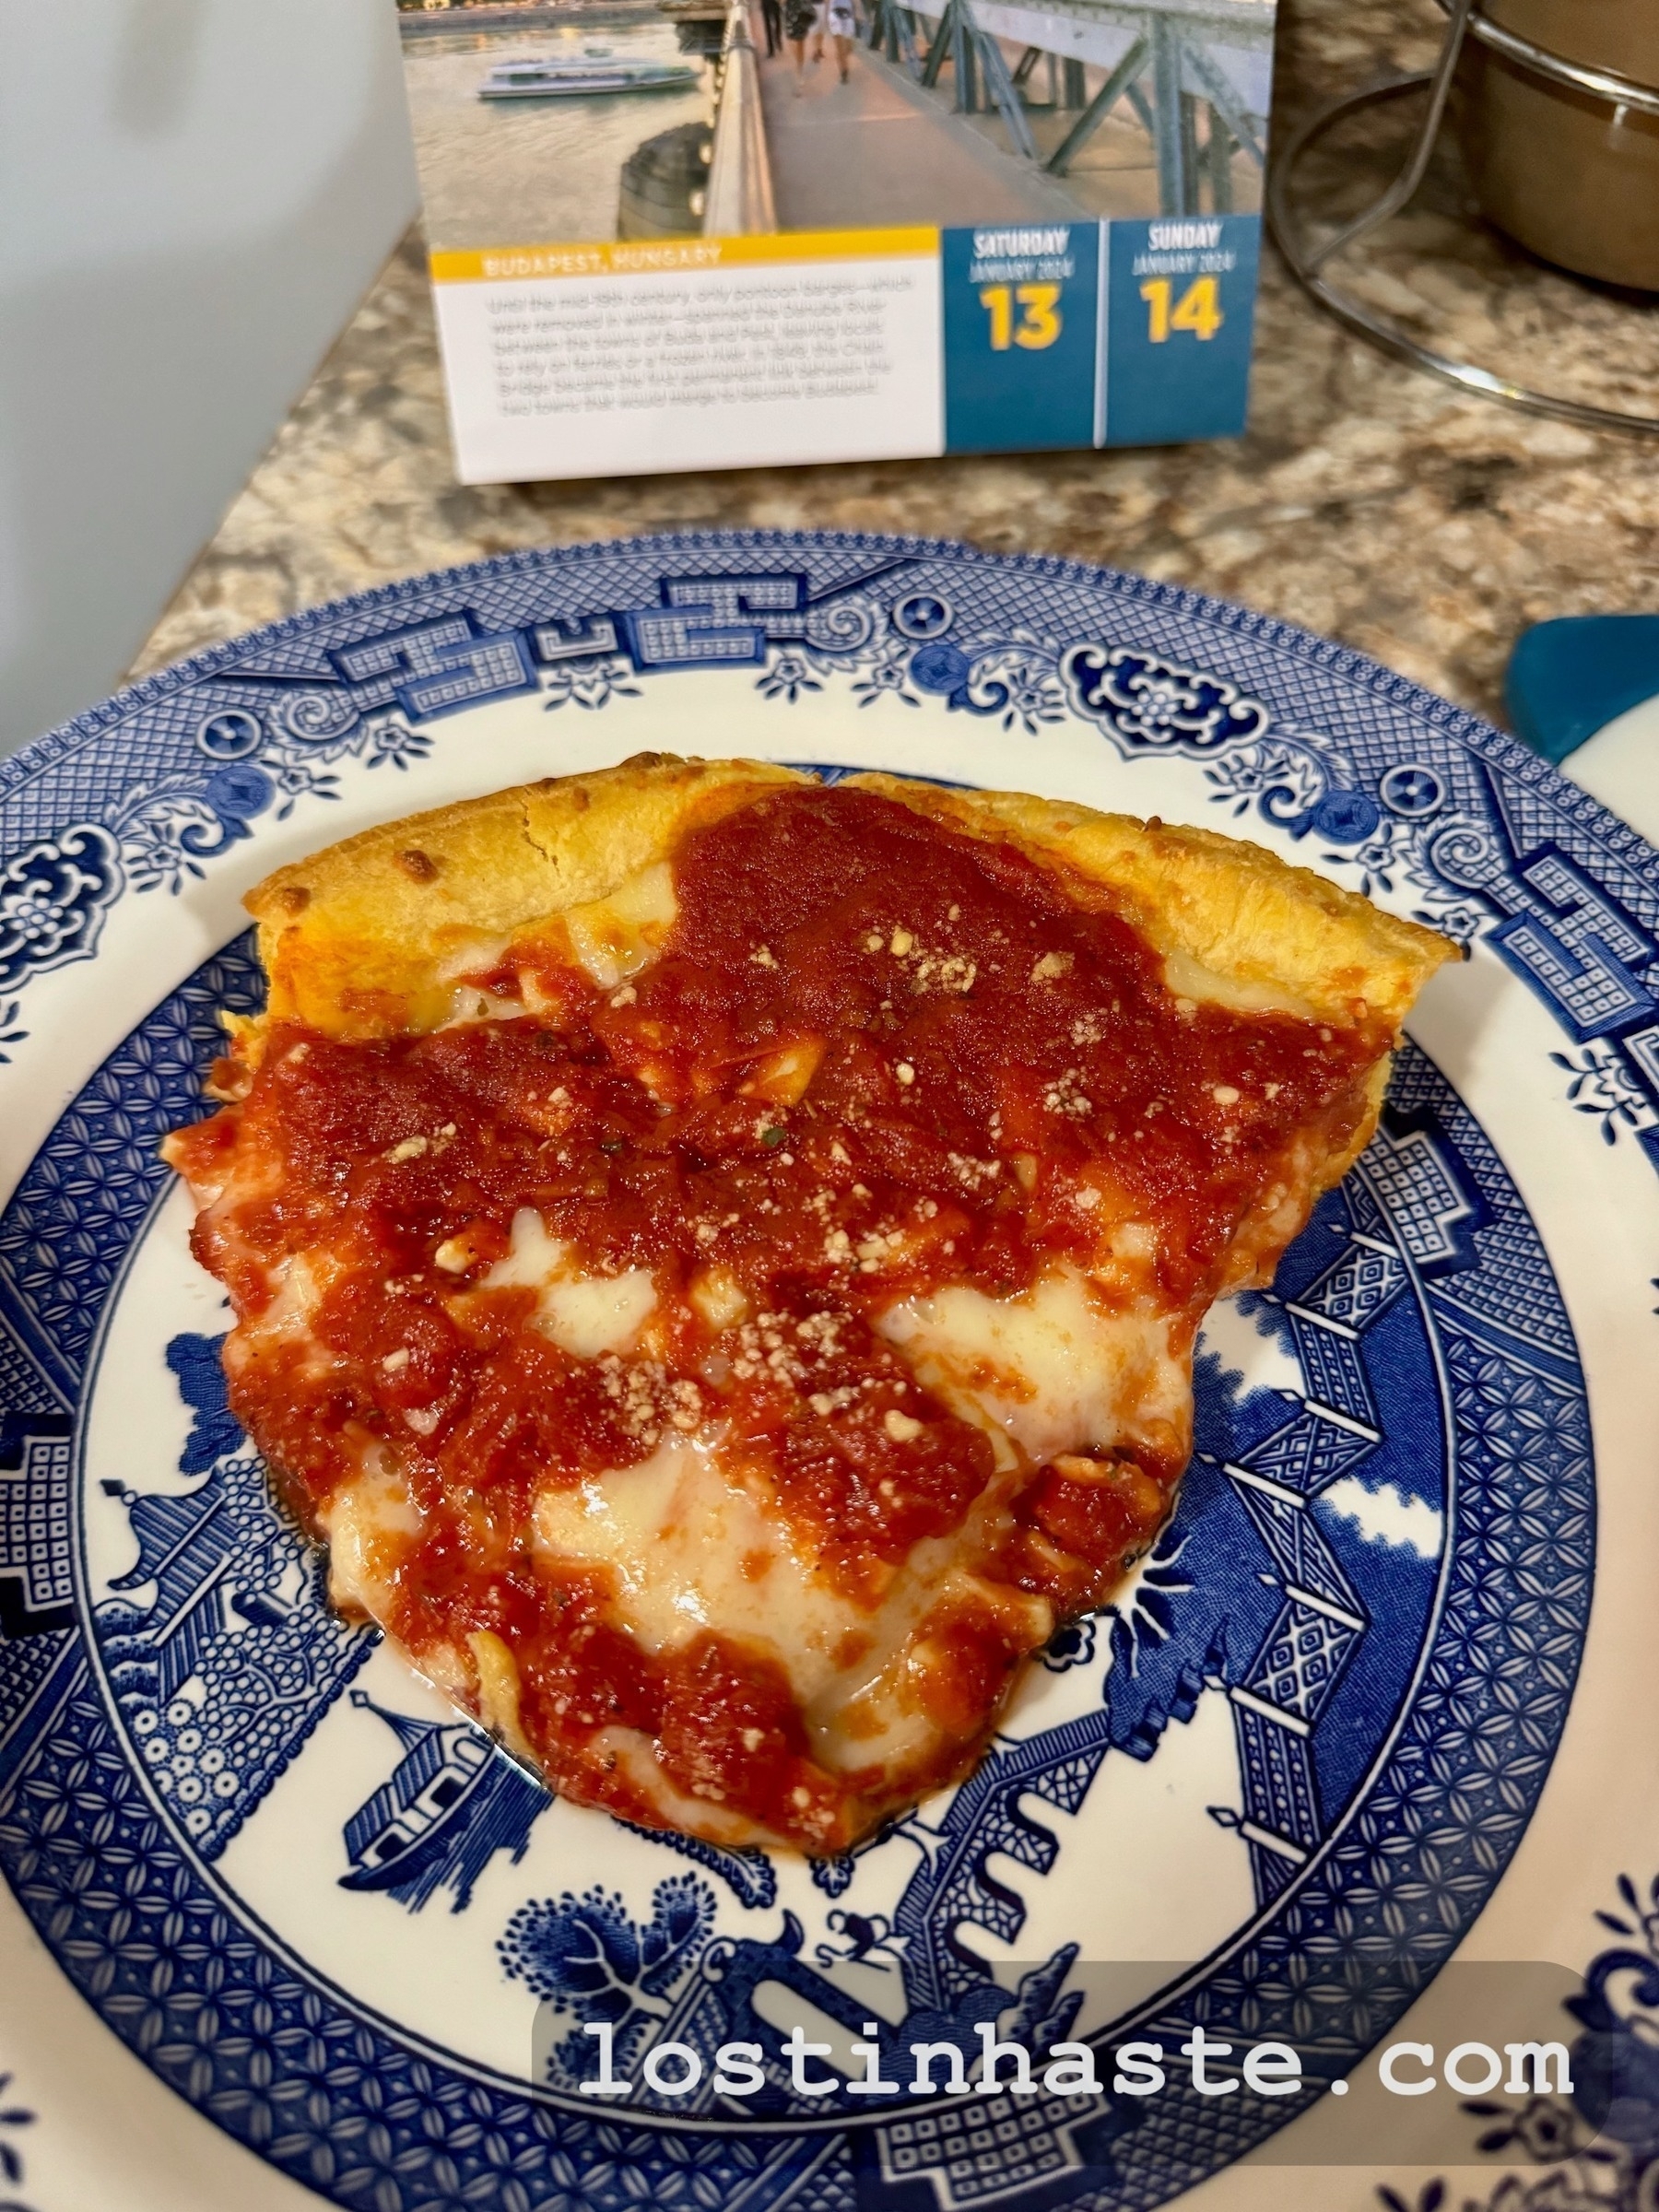 A slice of cheese pizza rests on a blue-and-white patterned plate, with a granular topping, possibly Parmesan, on a kitchen counter with a calendar in the background.